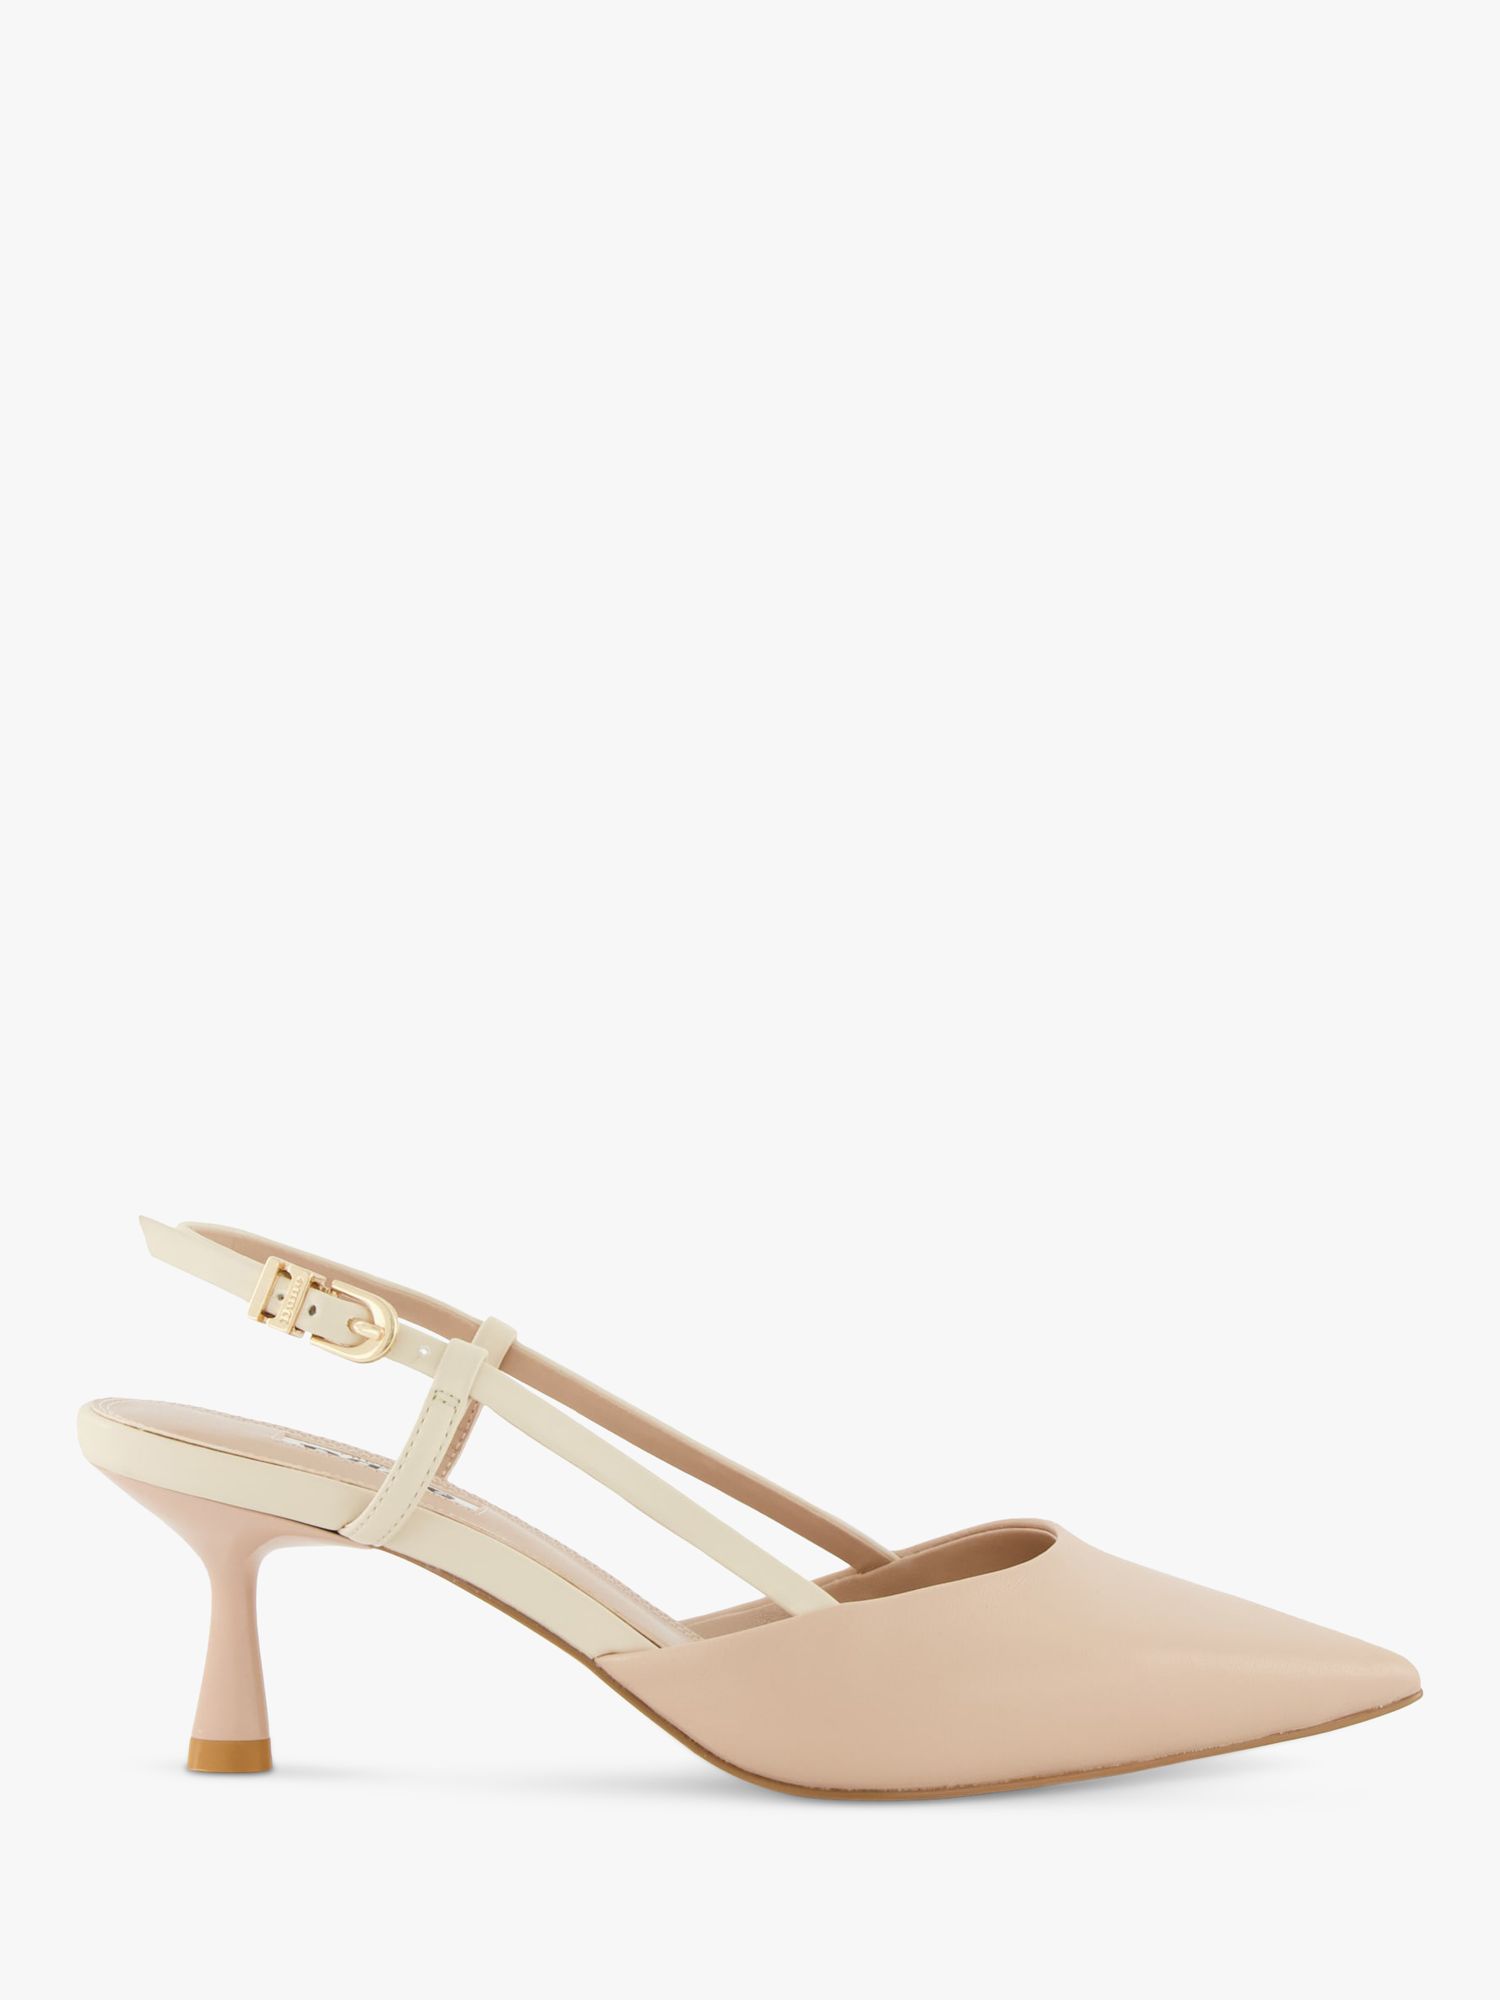 Dune Classify Slingback Leather Court Shoes, Nude